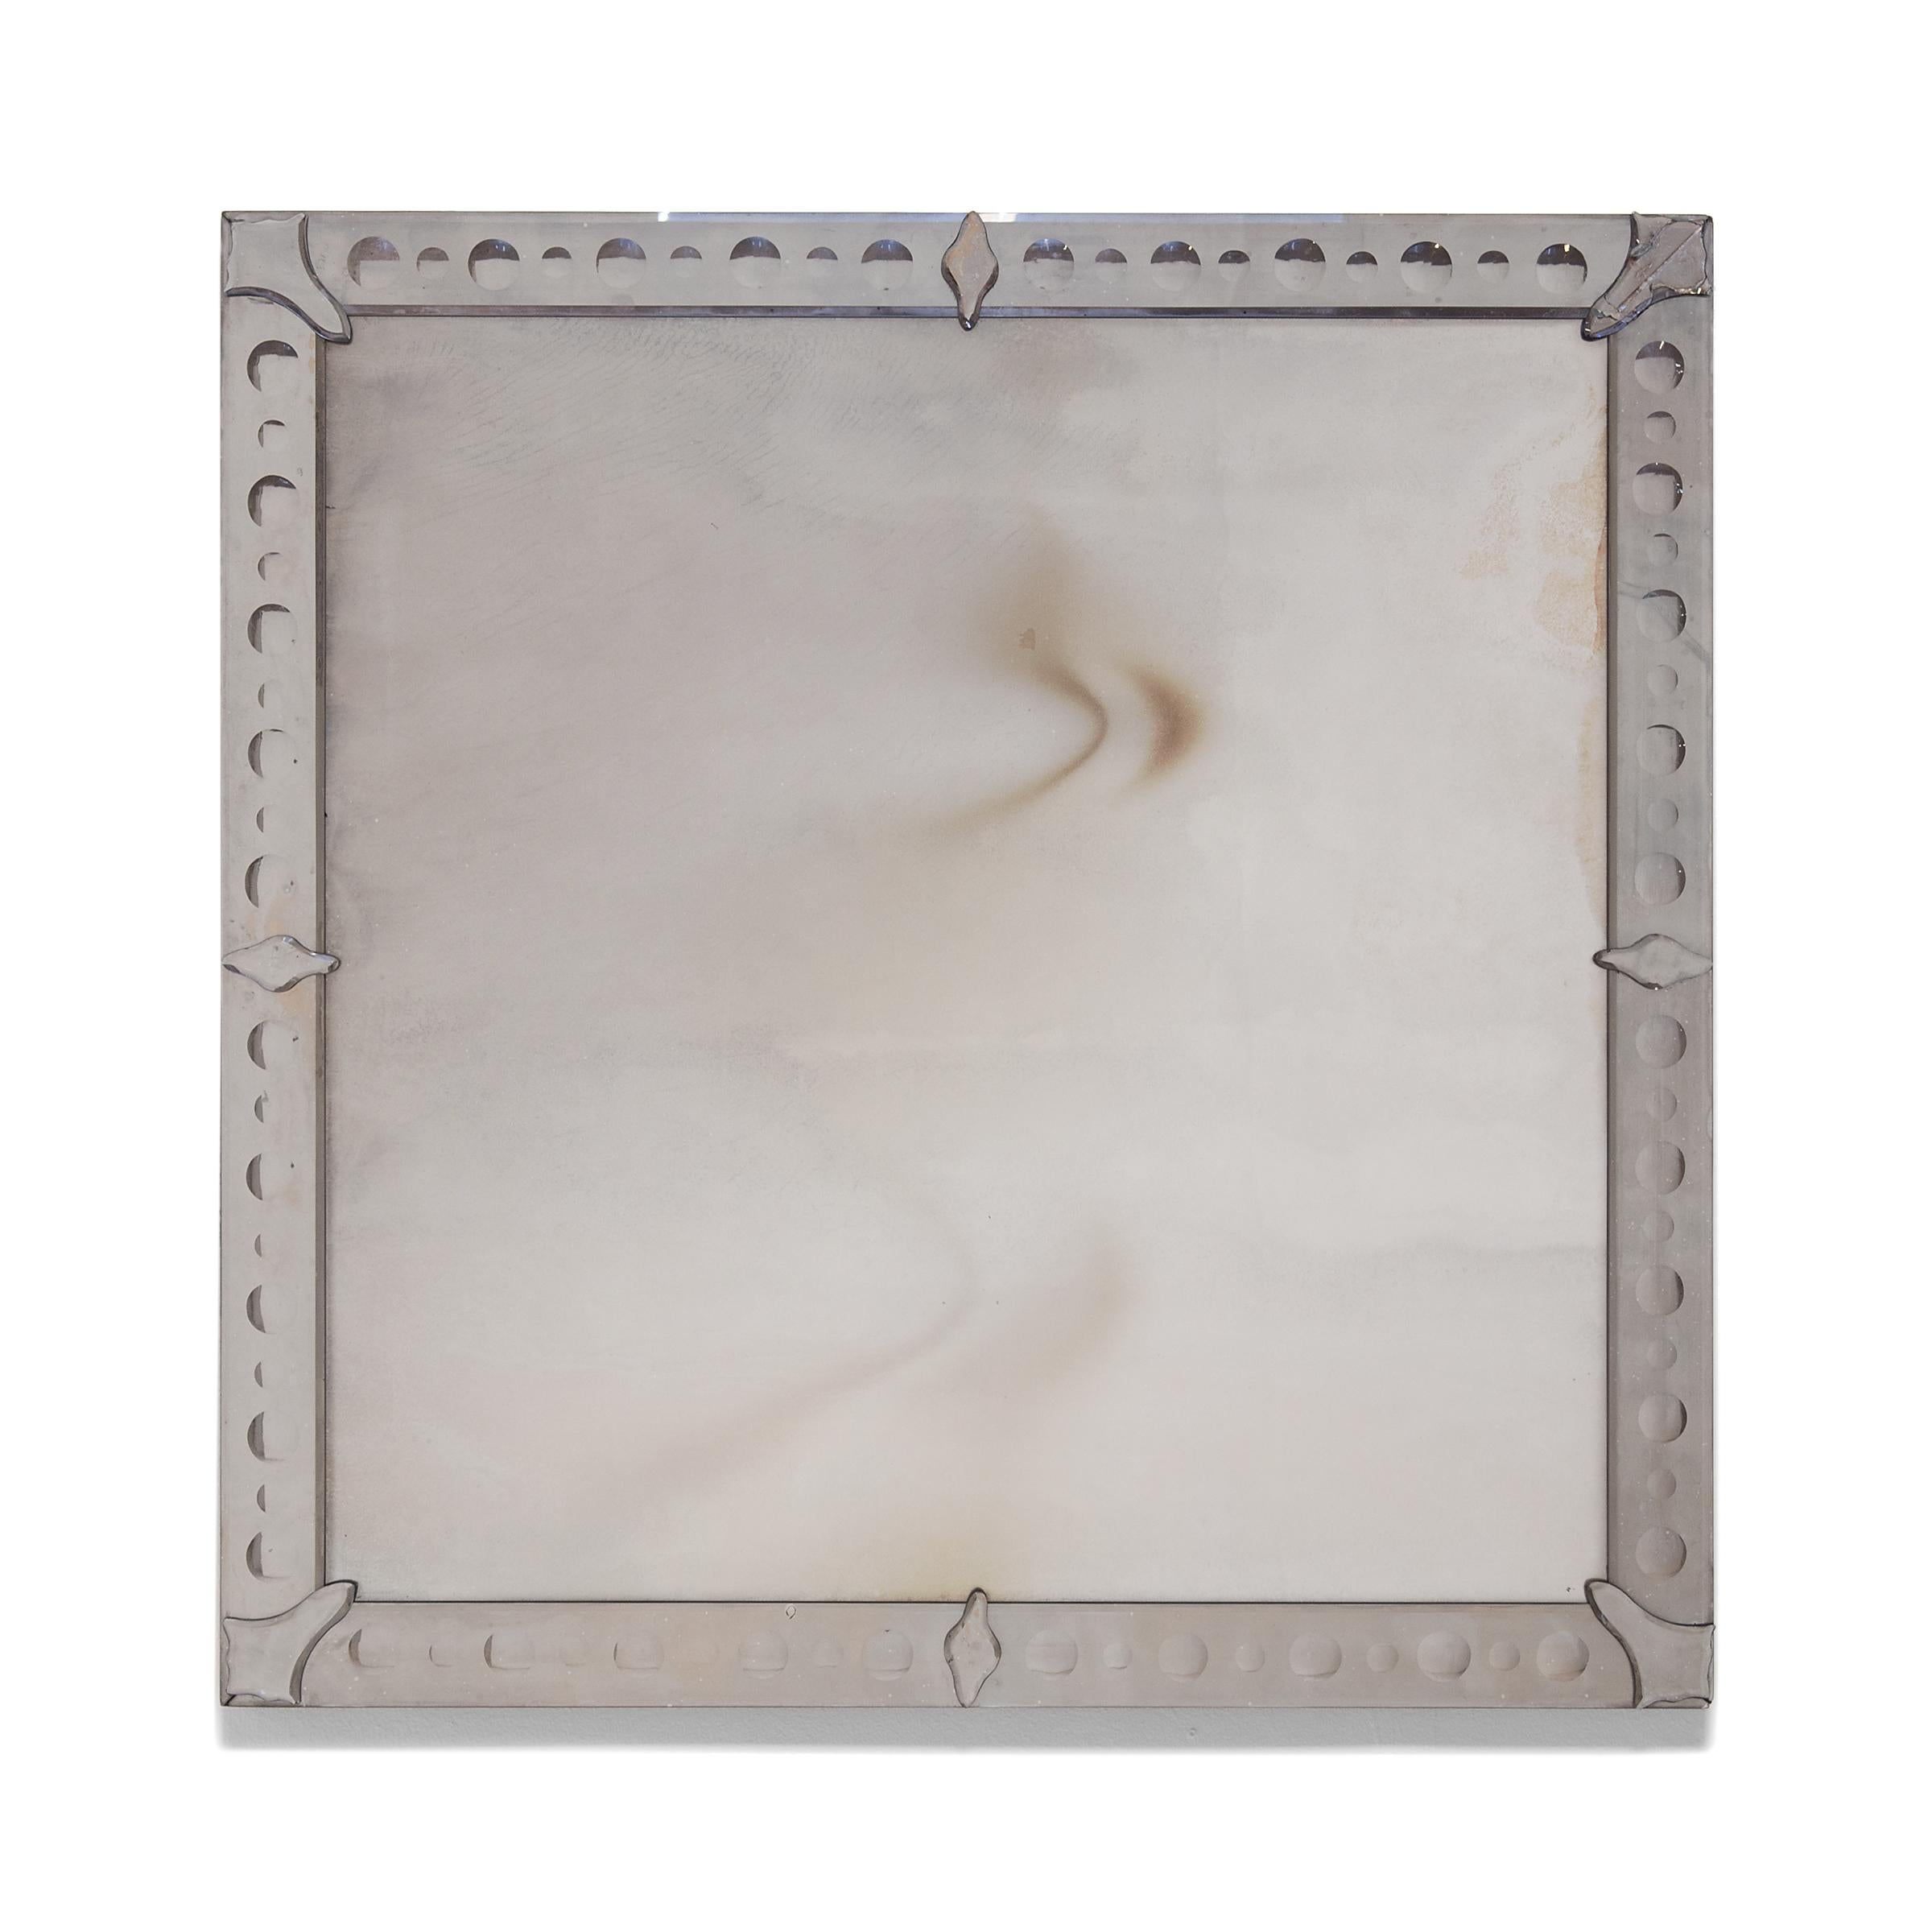 This pair of vintage wall mirrors is a nod to the imaginative designs of the global Art Deco movement of the early 20th century. The square mirrors are each set within mirrored frames decorated with a pattern of bubble-like convex circles. Affixed